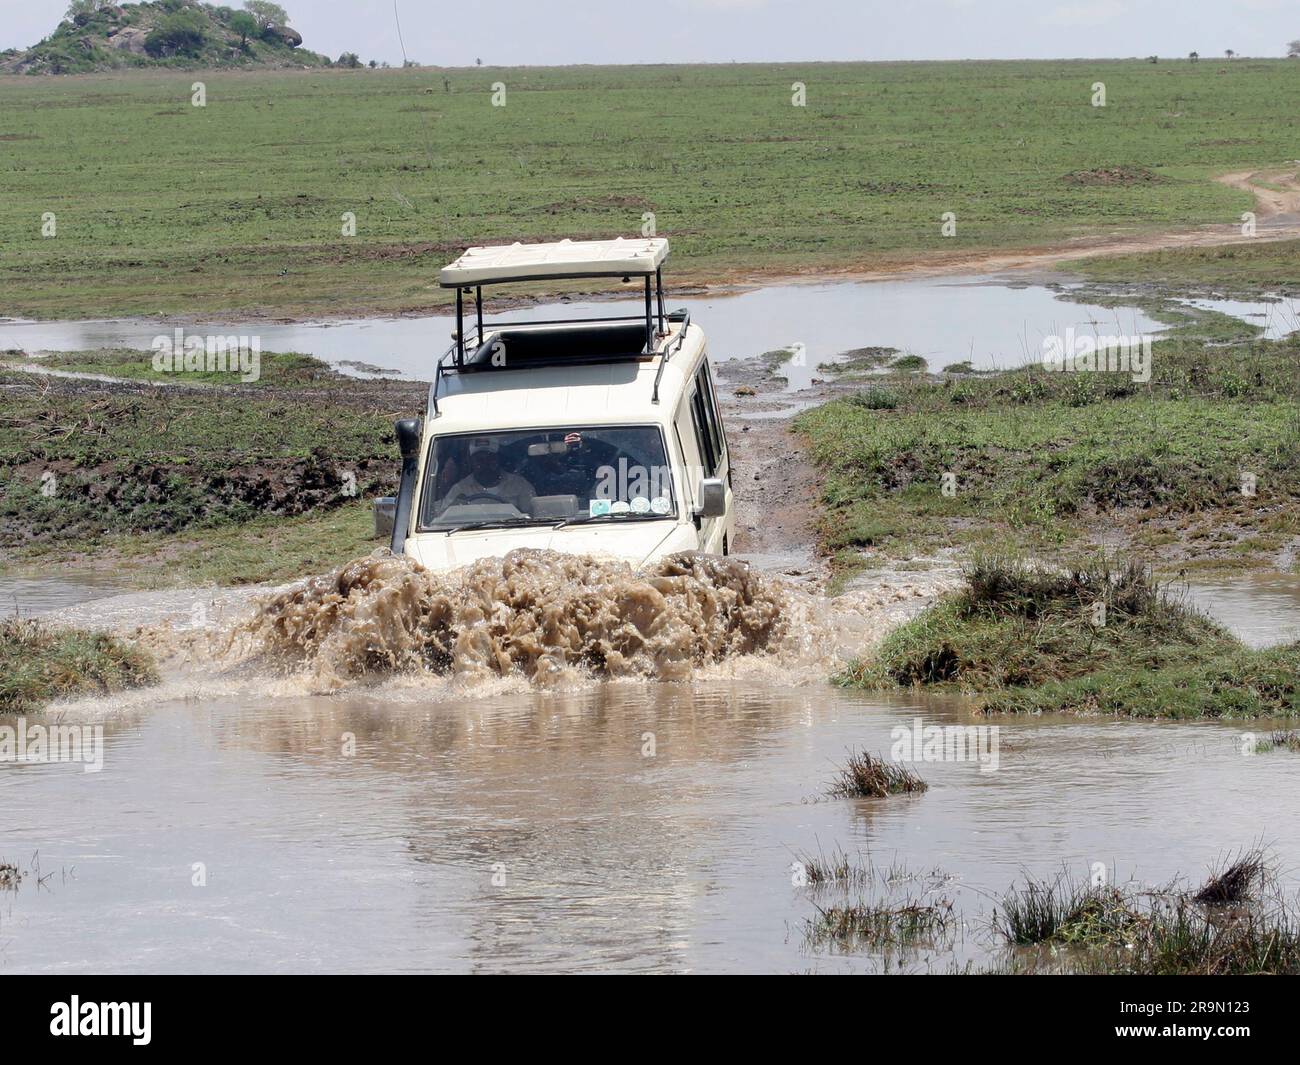 Africa, Tanzania, Serengeti National Park, Safari tourists in an open top land rover crossing a water barrier Stock Photo